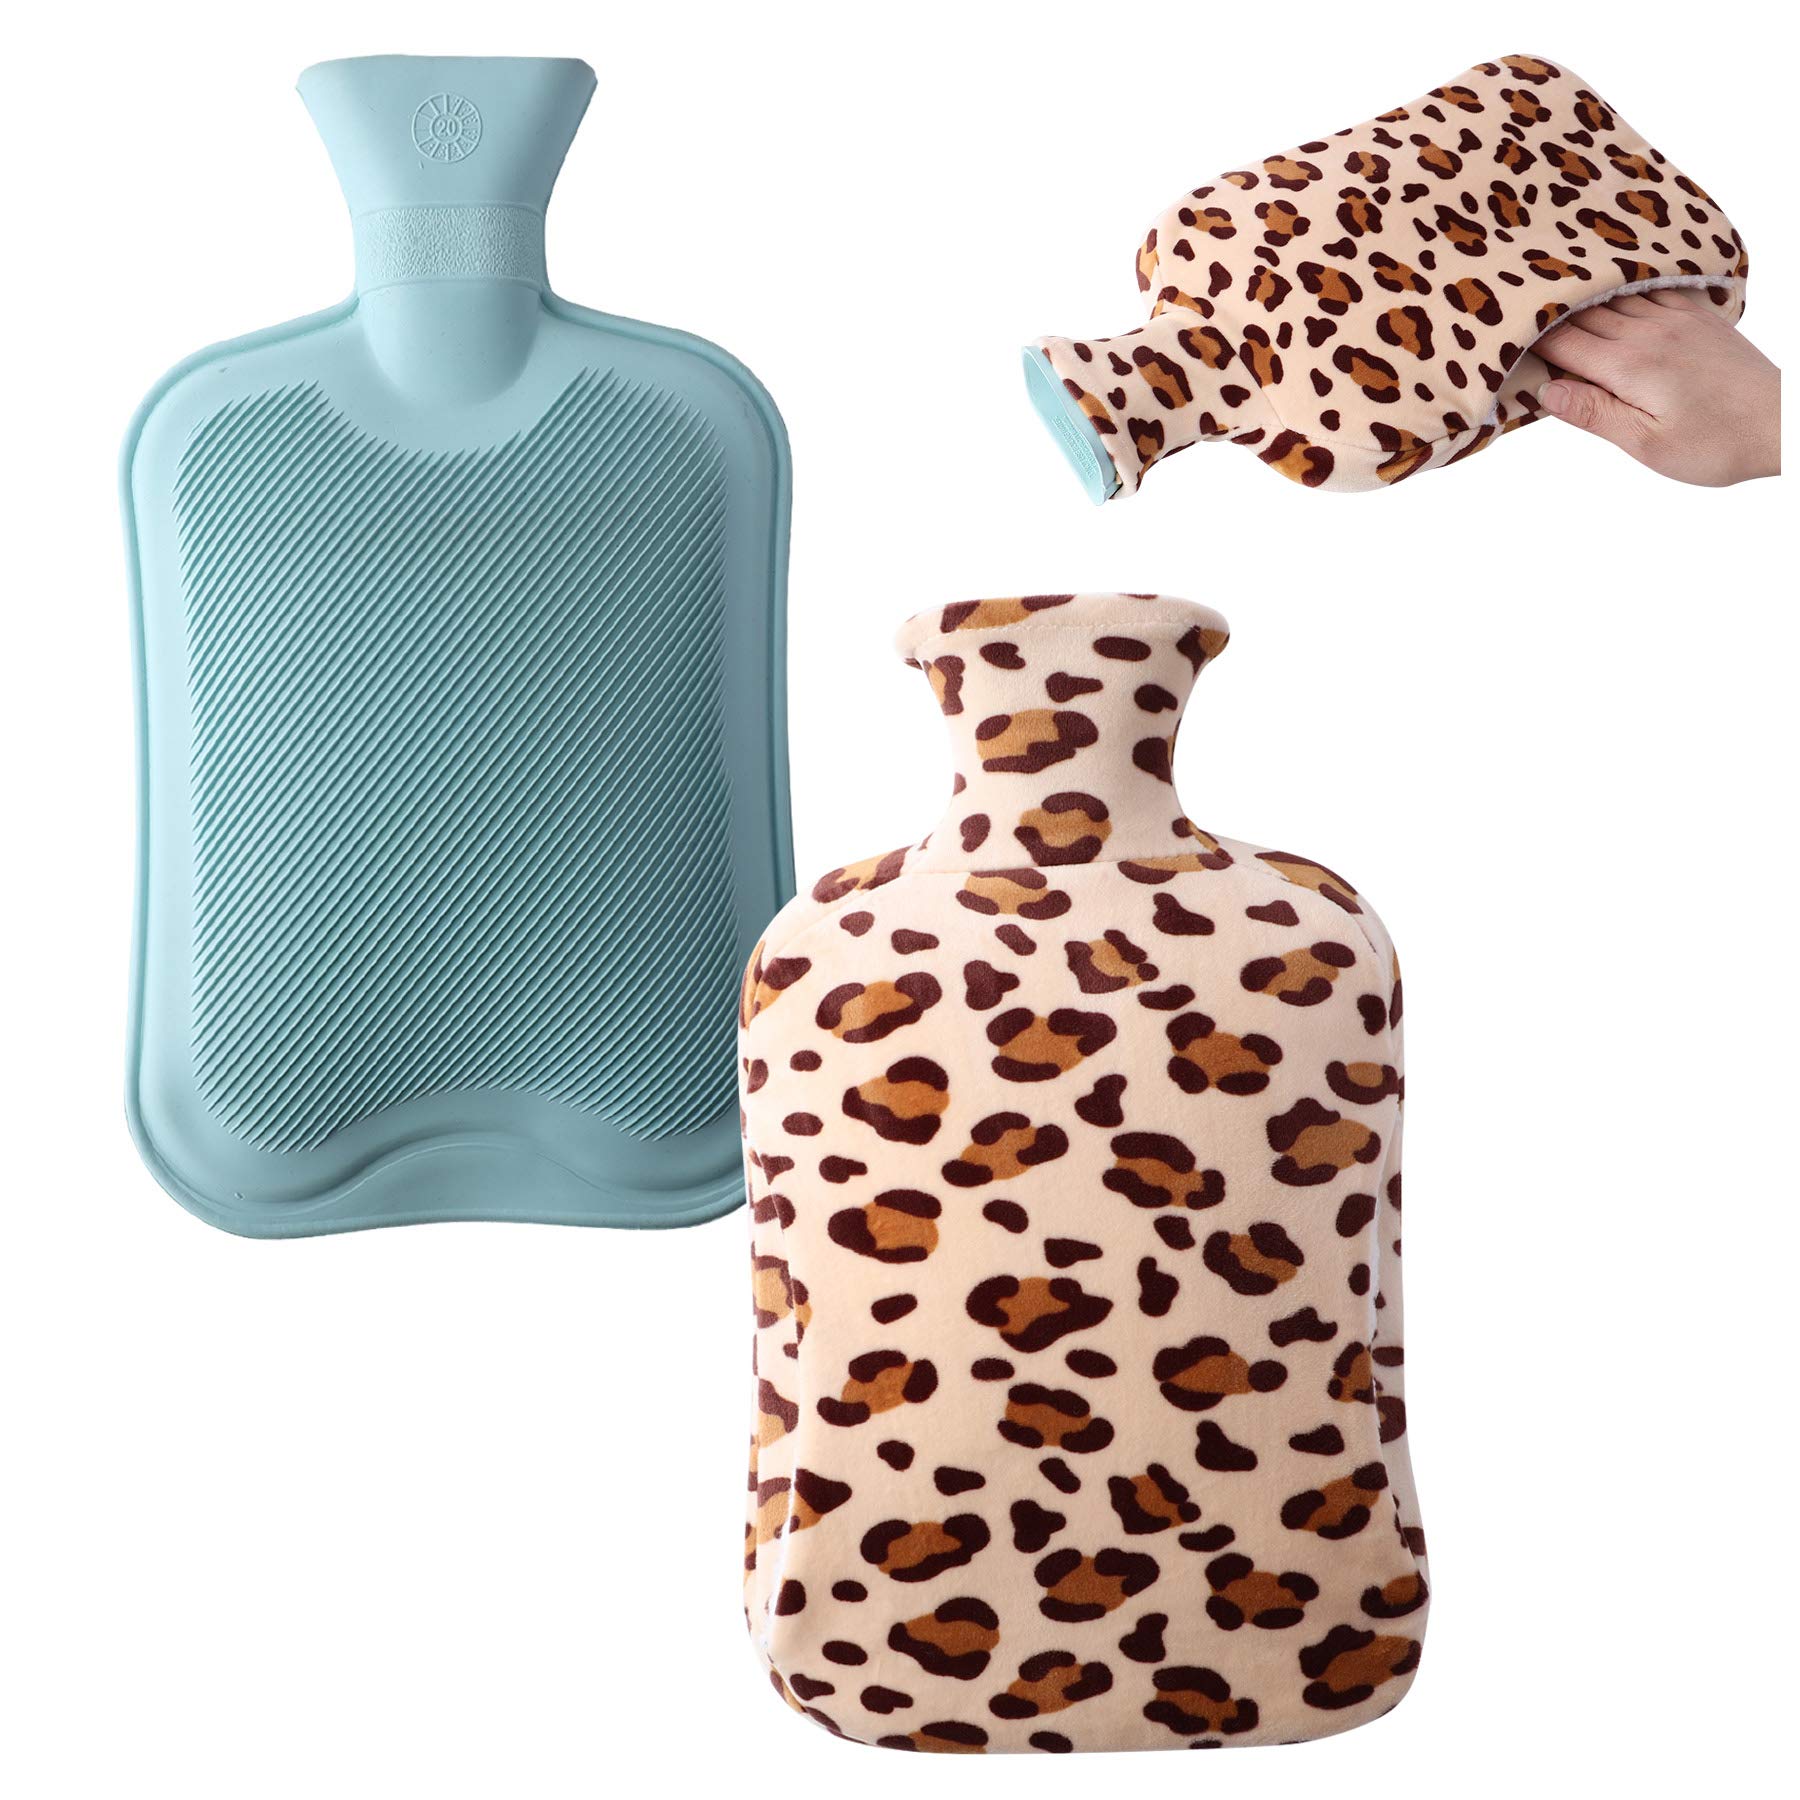 2 Liter Hot Water Bottle, Ease Aches and Pains Aid Comfort Sleep, 